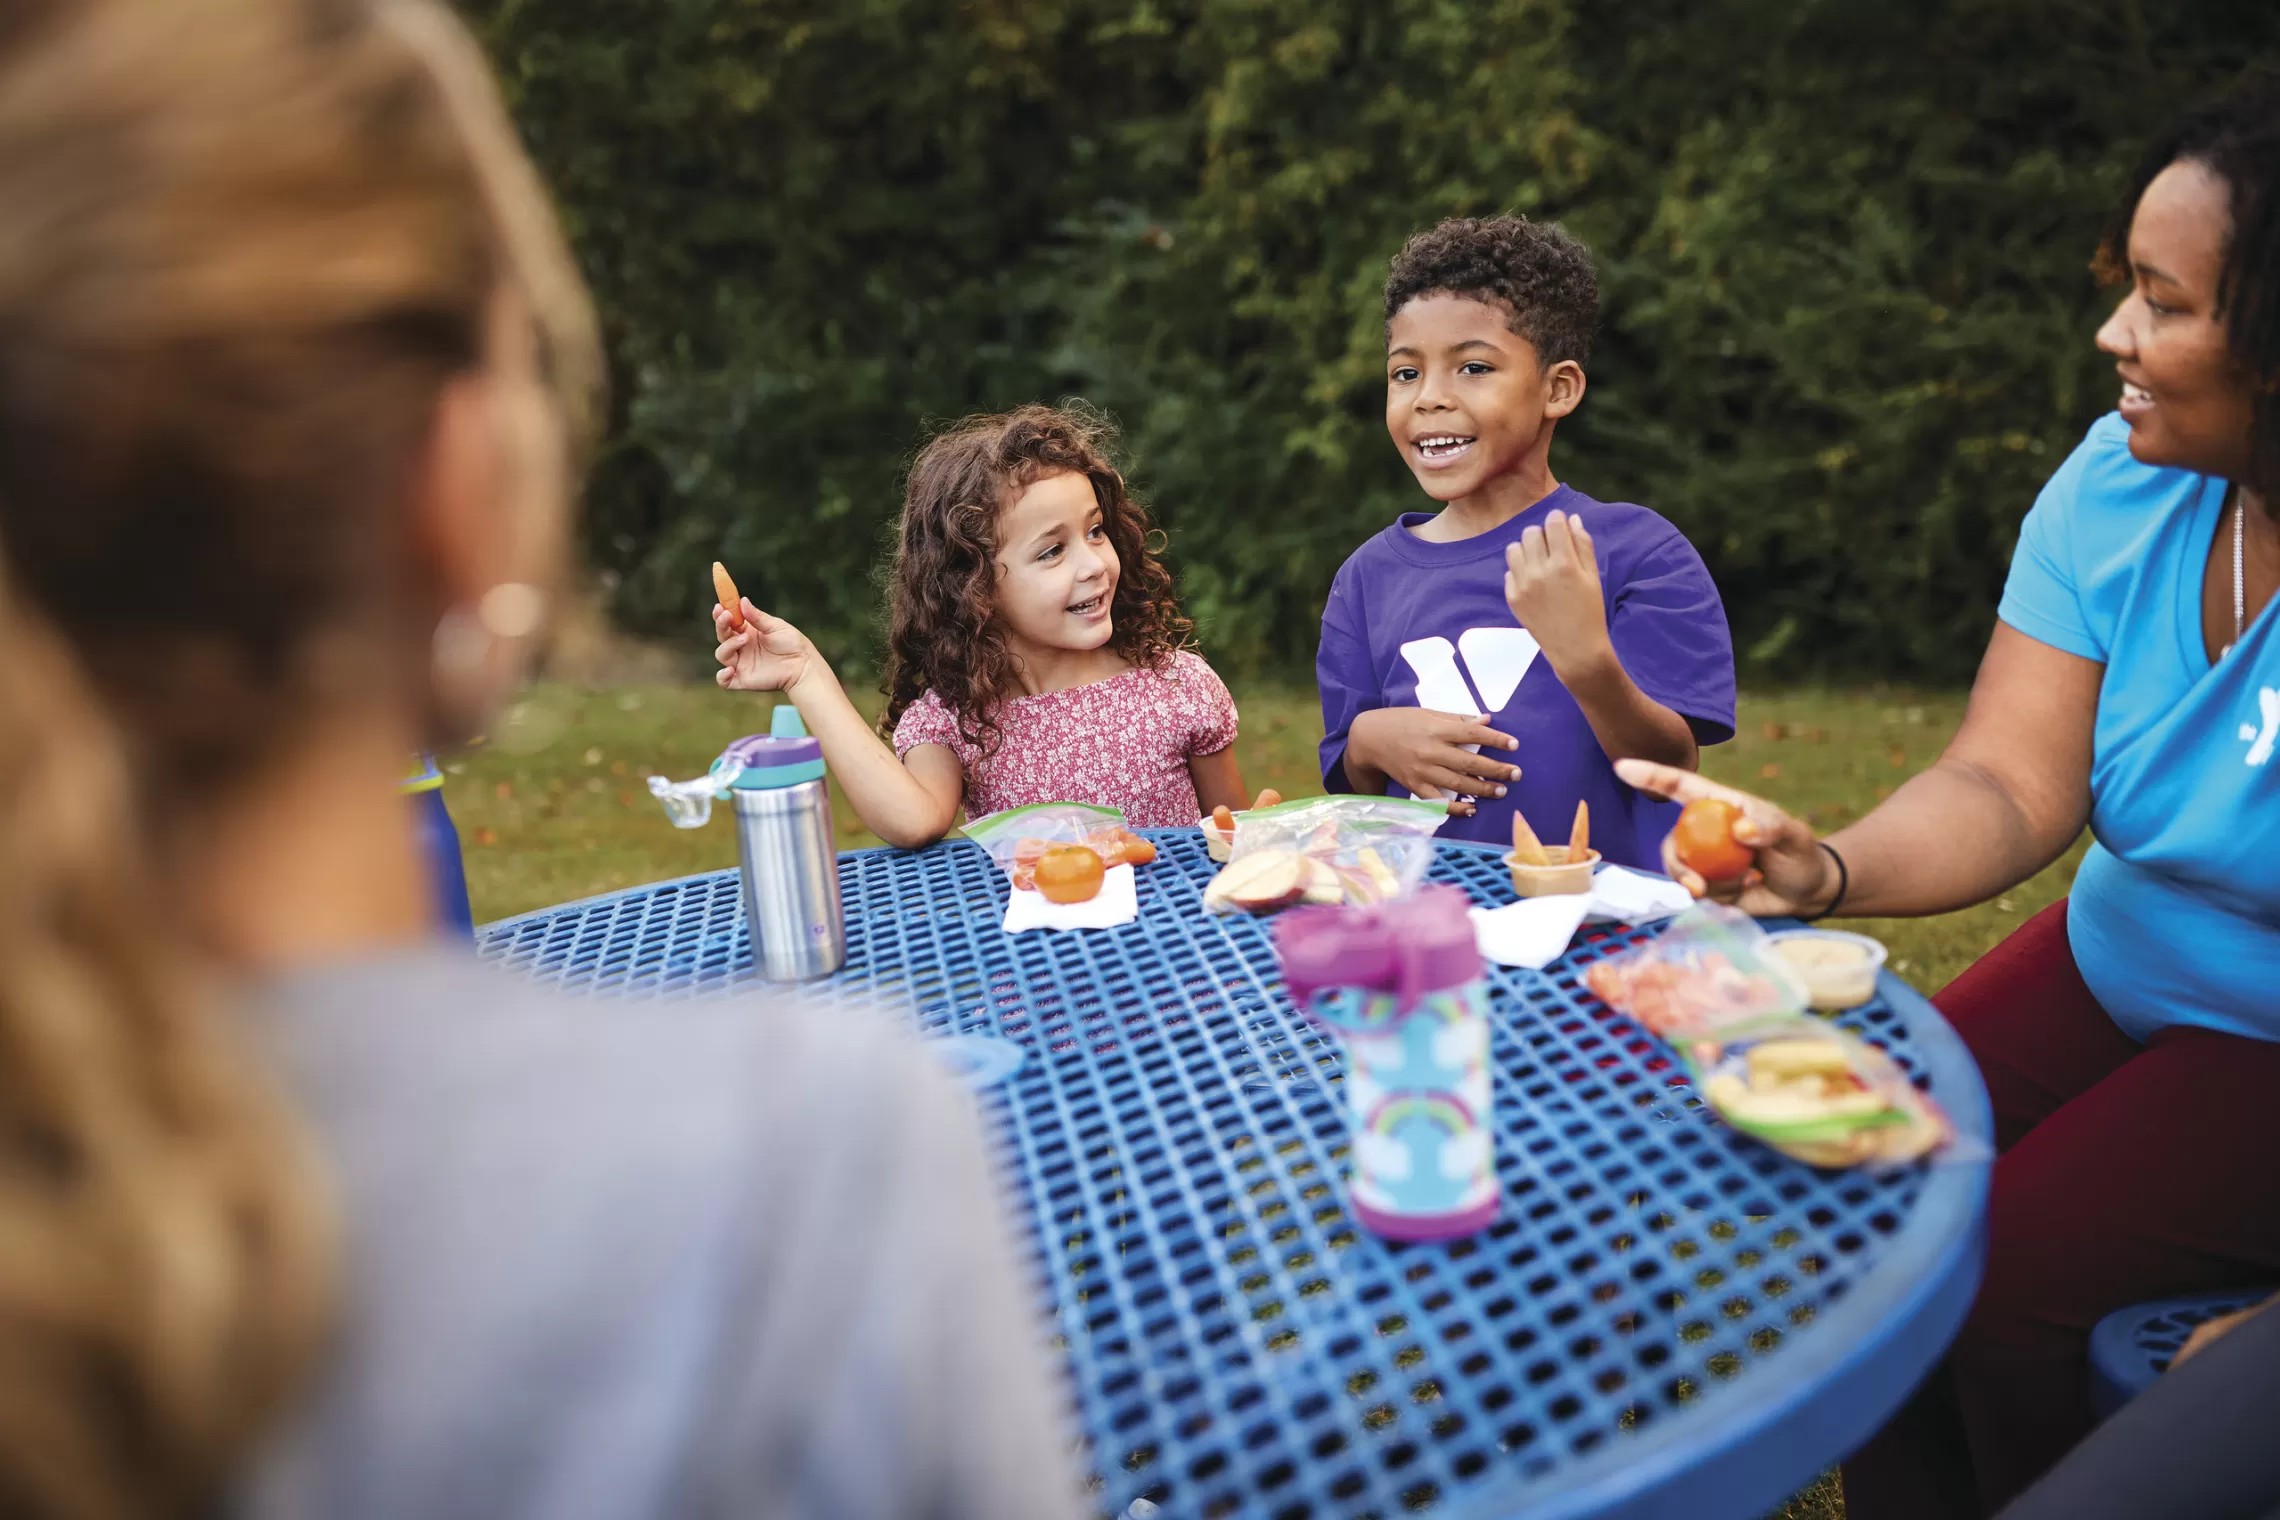 Children sit at a picnic table eating healthy foods that improve bone health